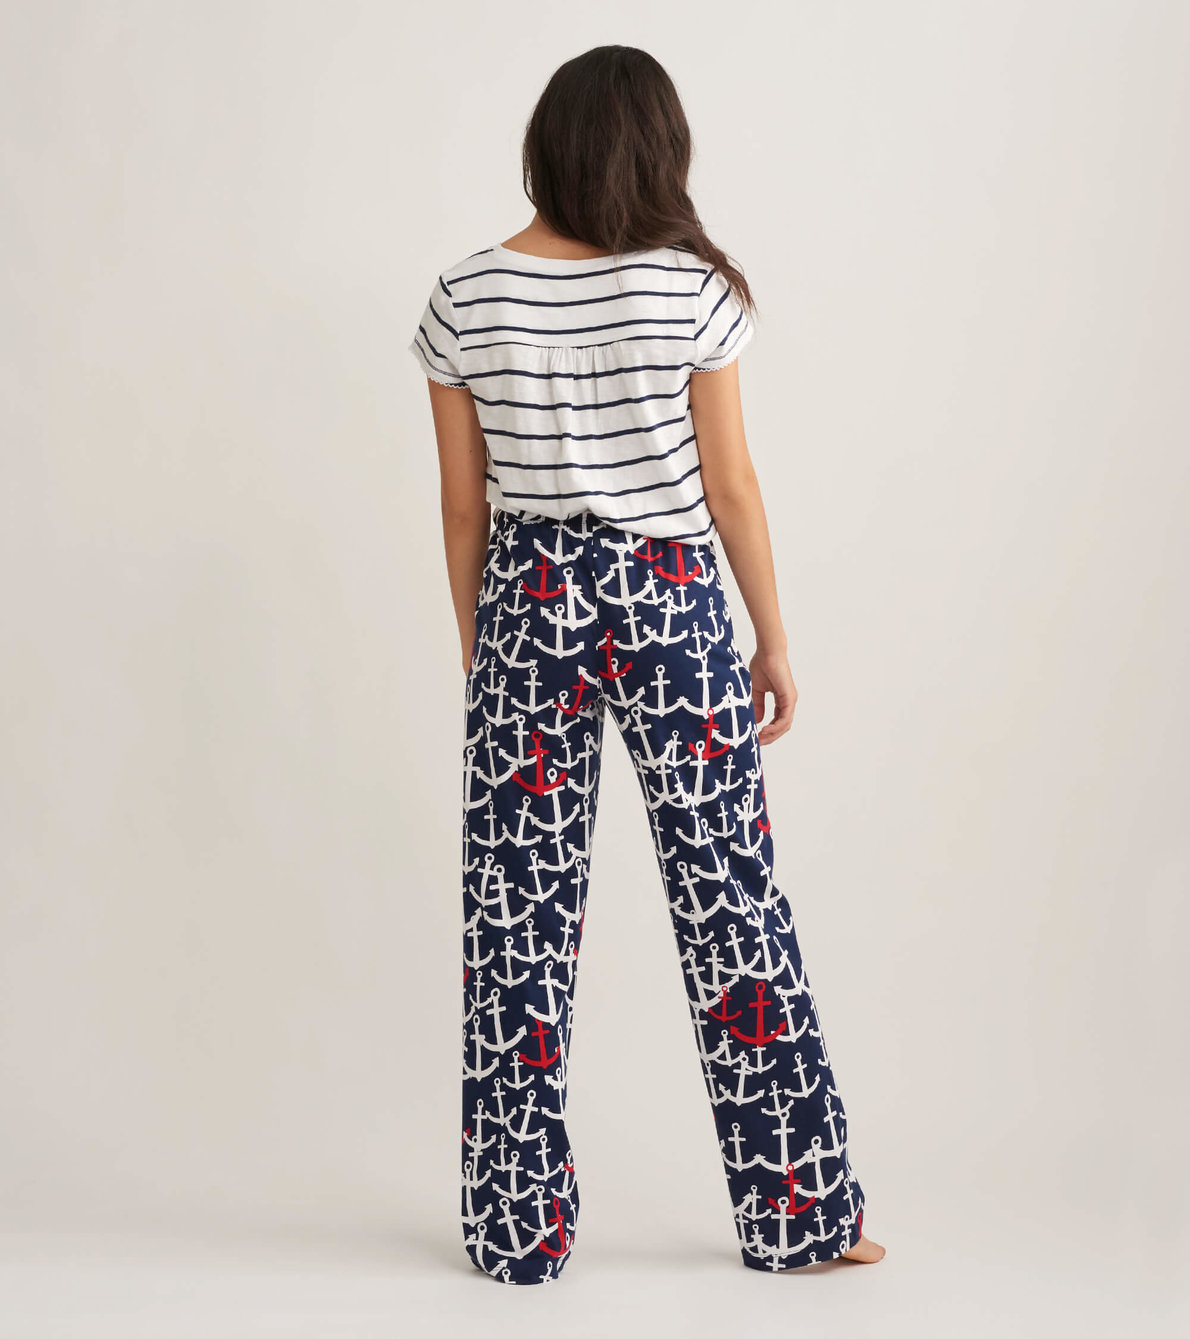 View larger image of Anchors Women's Tee and Pants Pajama Separates